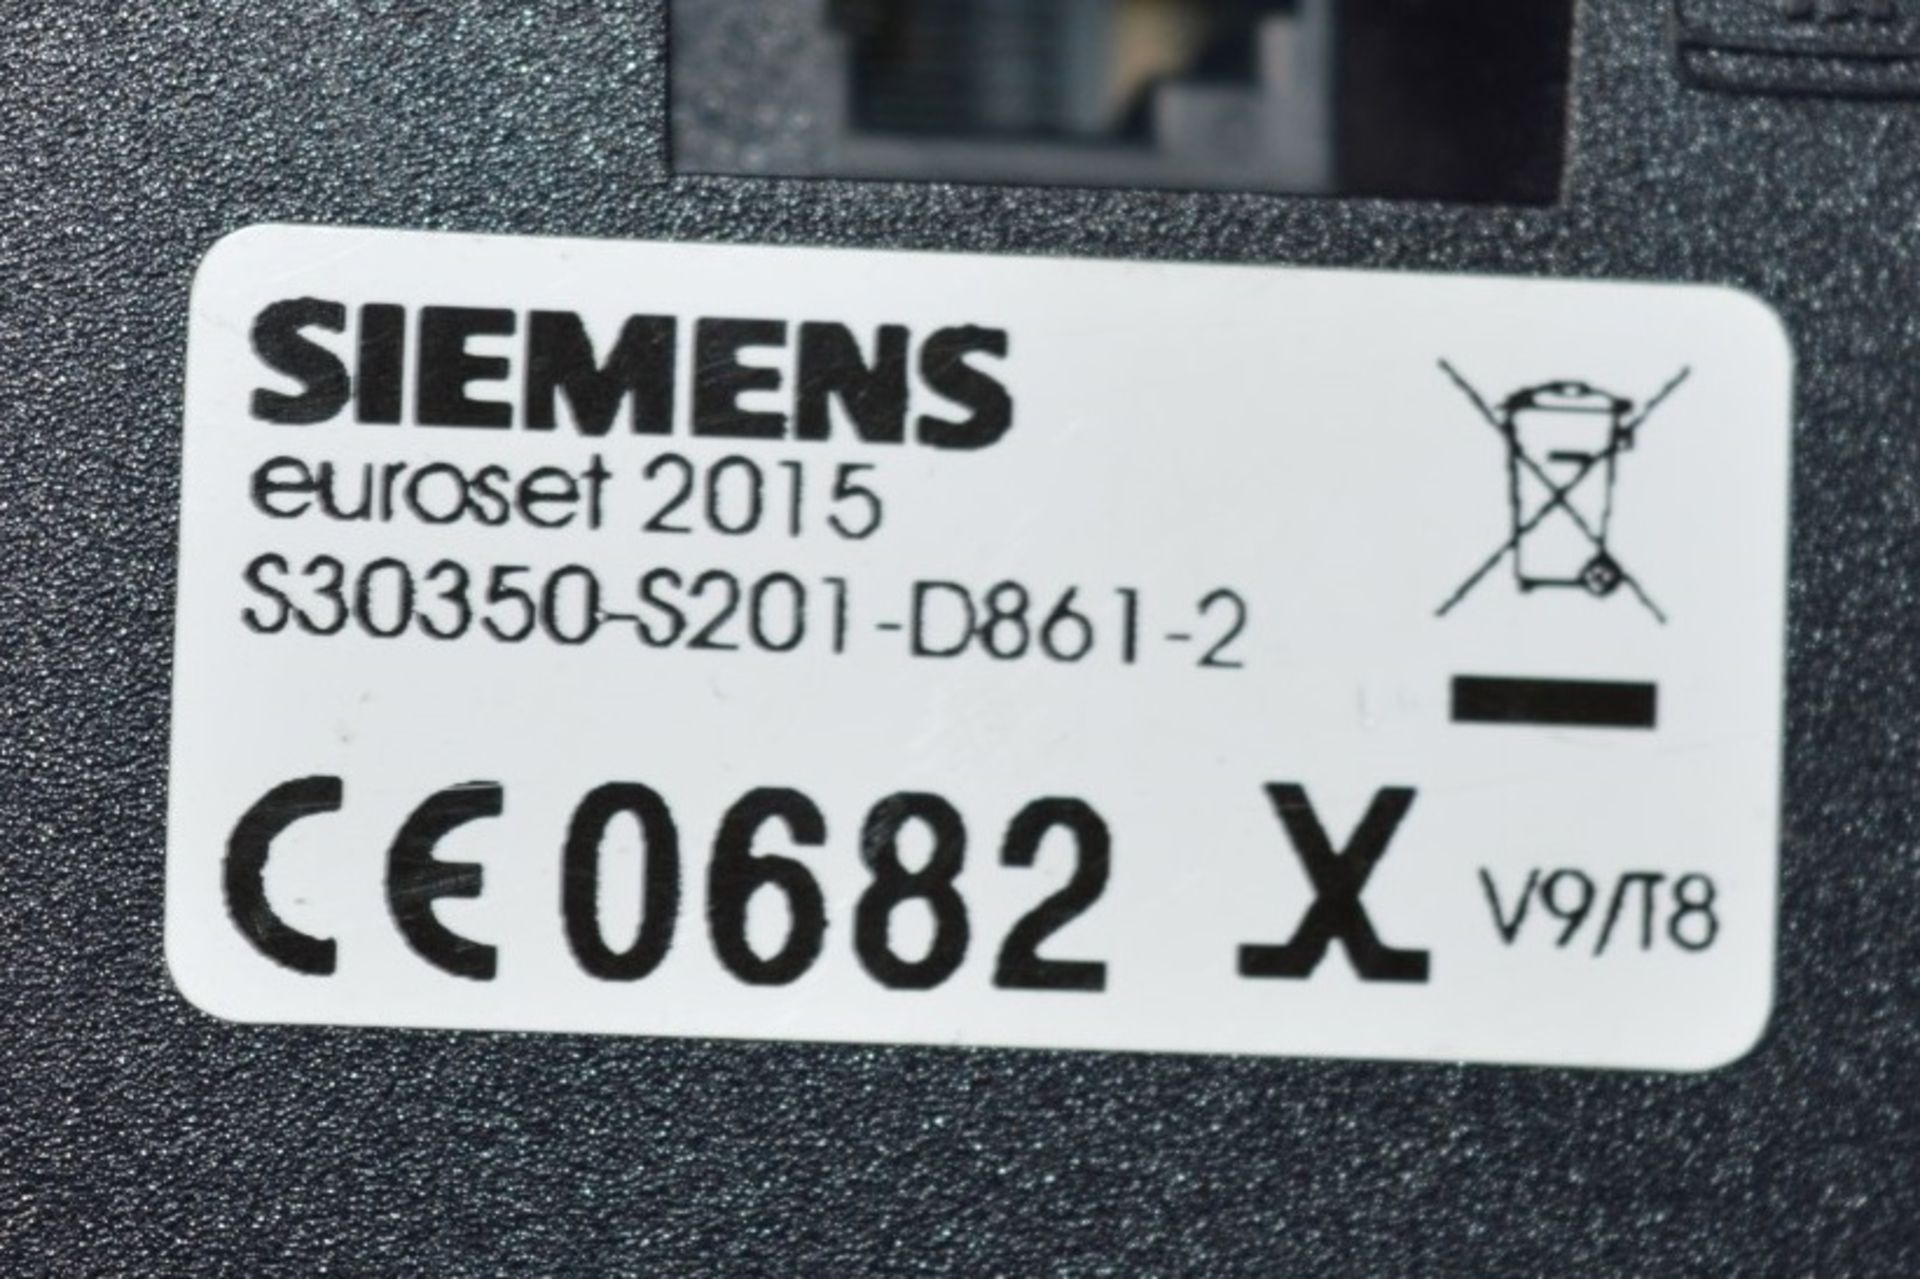 12 x Siemens Euroset 2015 Office Business Telephones - Removed From Office Environment - CL011 - Ref - Image 3 of 4